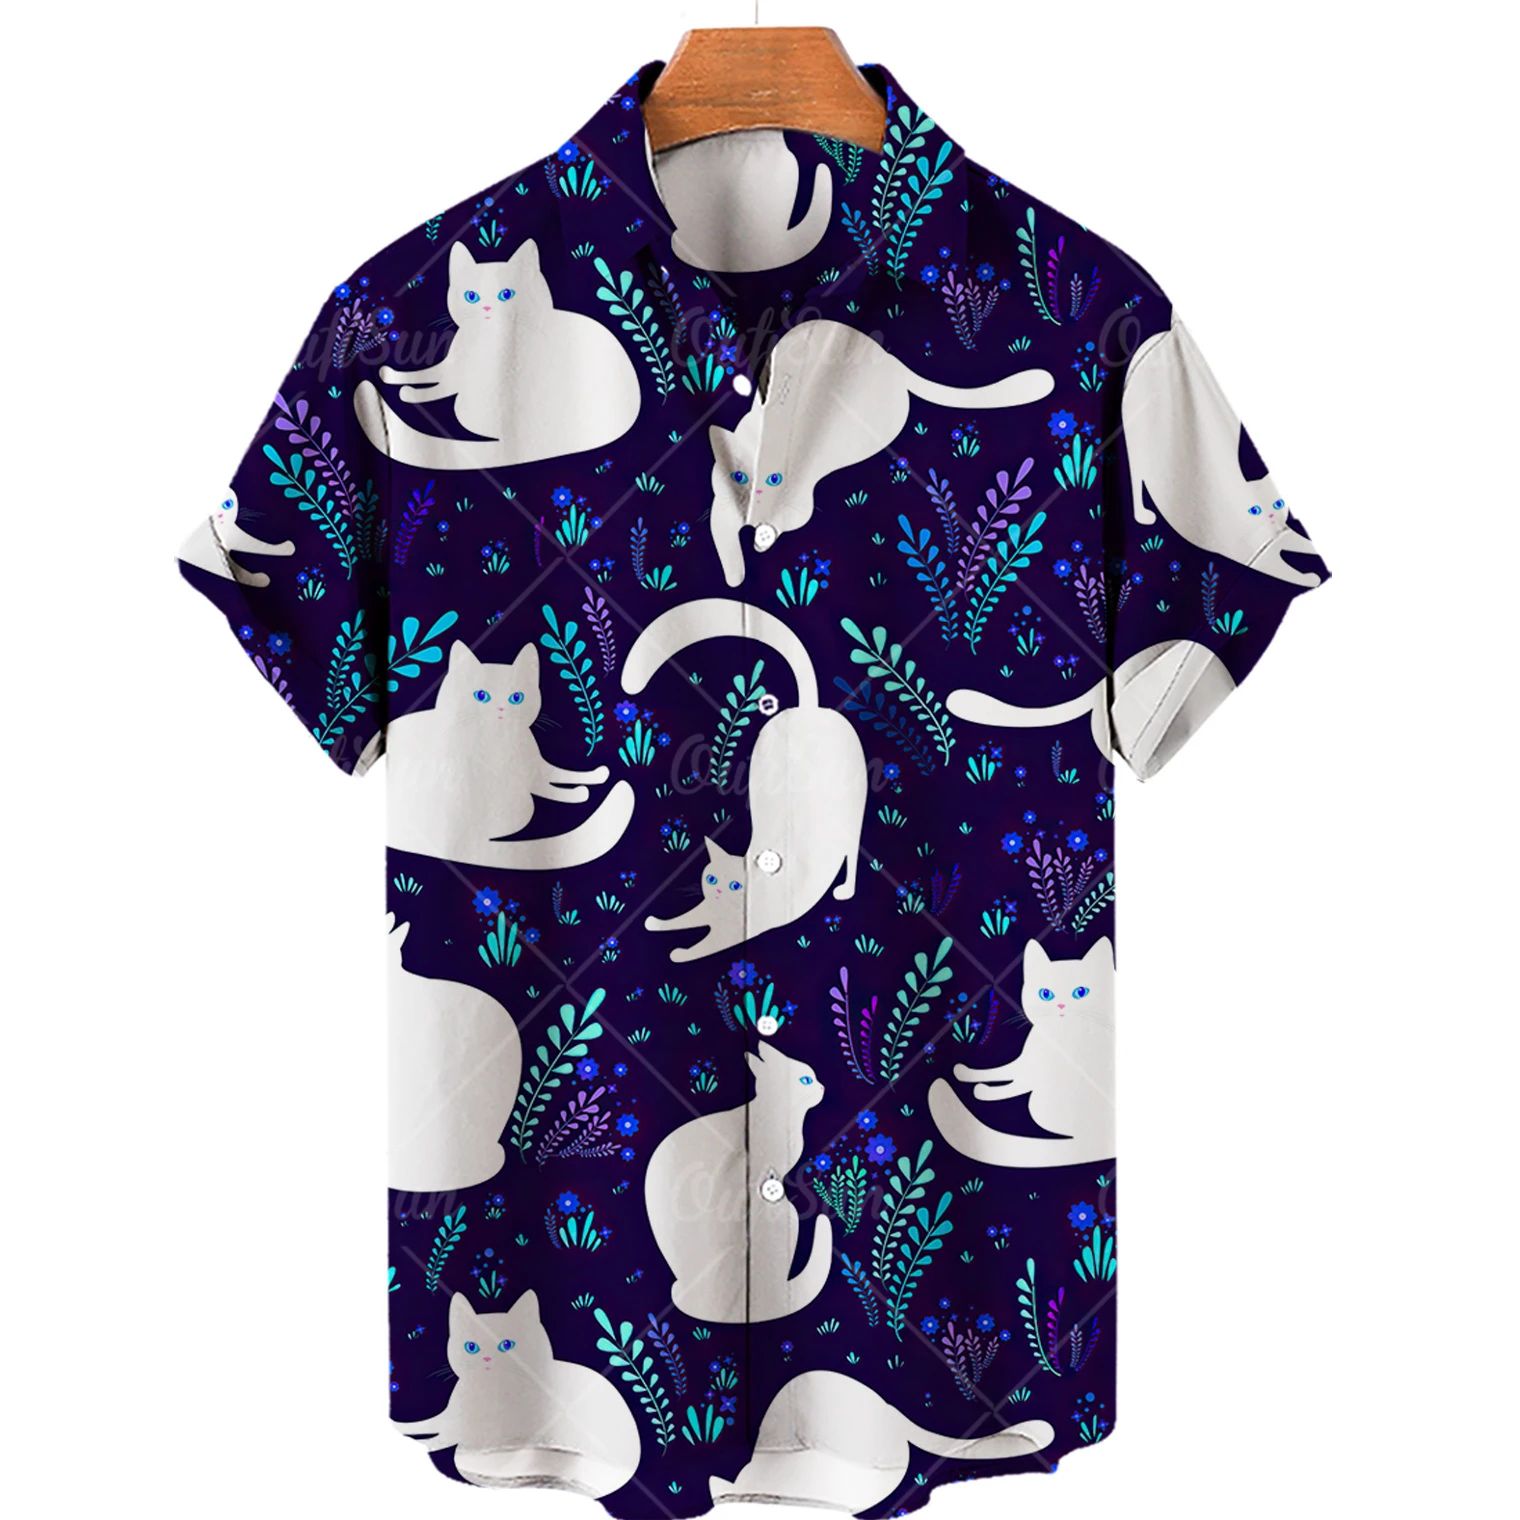 New Hawaiian Men's And Women's Shirt 3d Cute Cat Minimalist Large Size Loose Fitting Casual Fashion Versatile Beach Vacation Tra